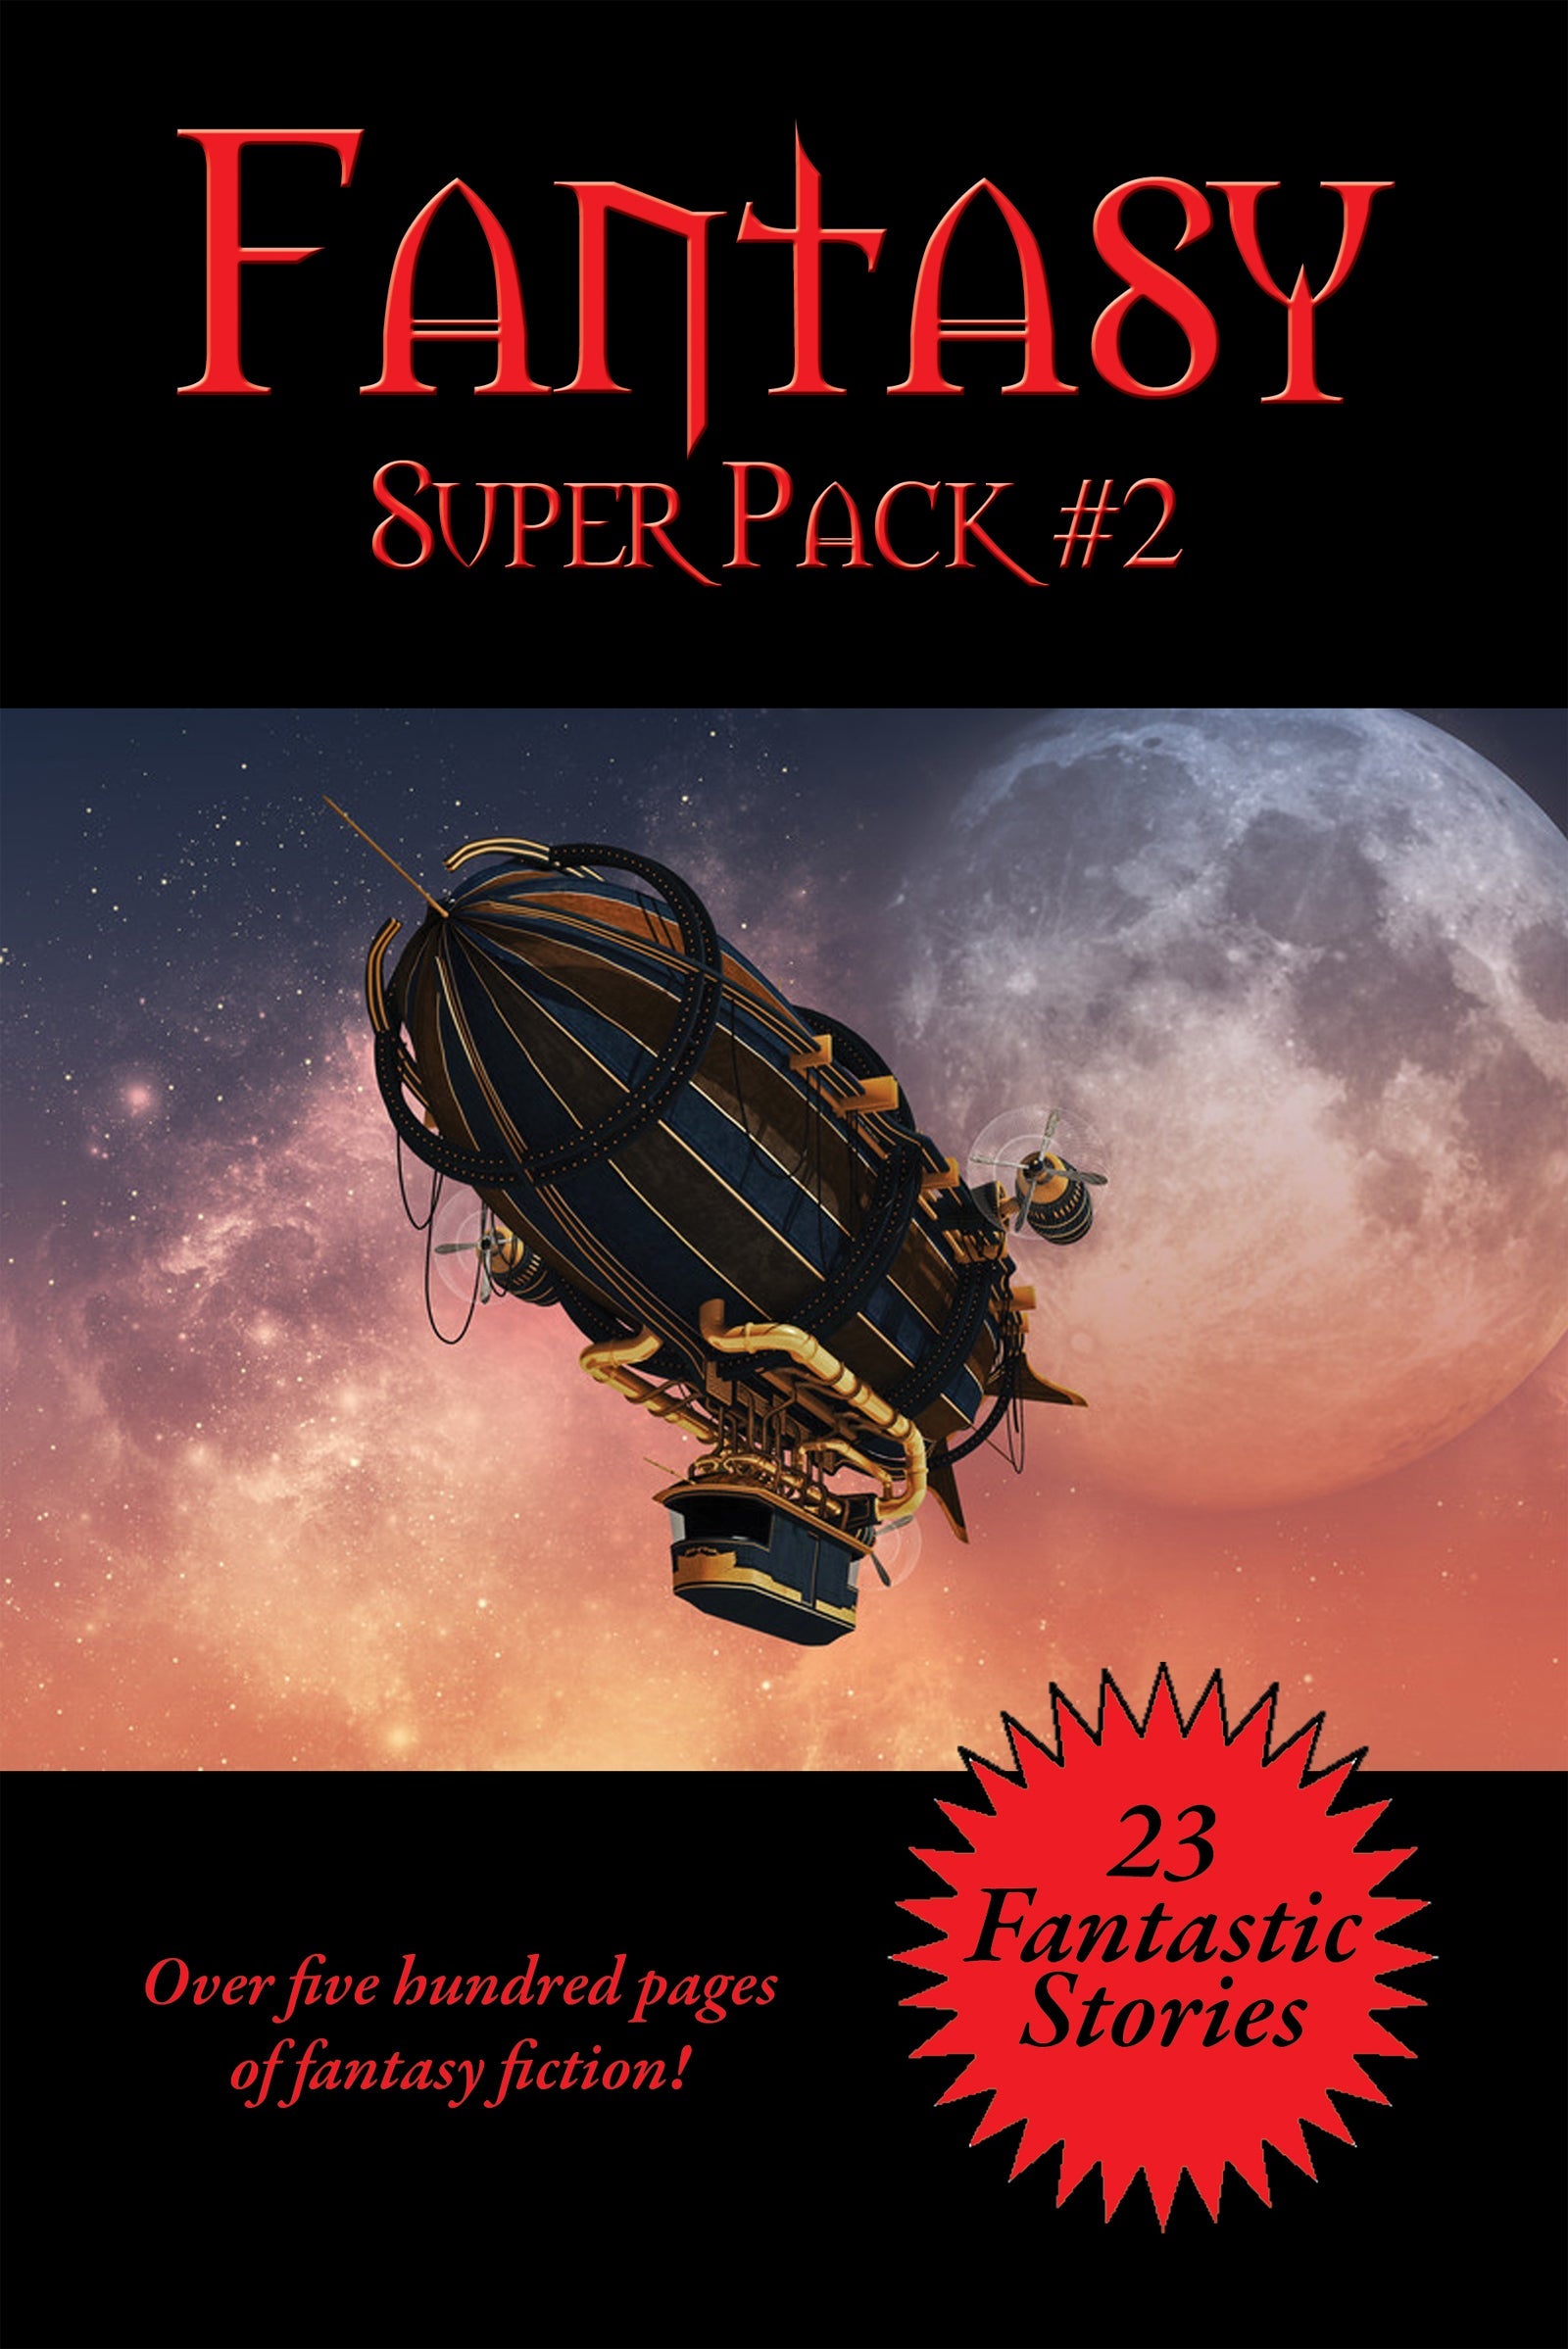 Cover art for Positronic Super Pack #2, the second Fantasy Super Pack.                                         